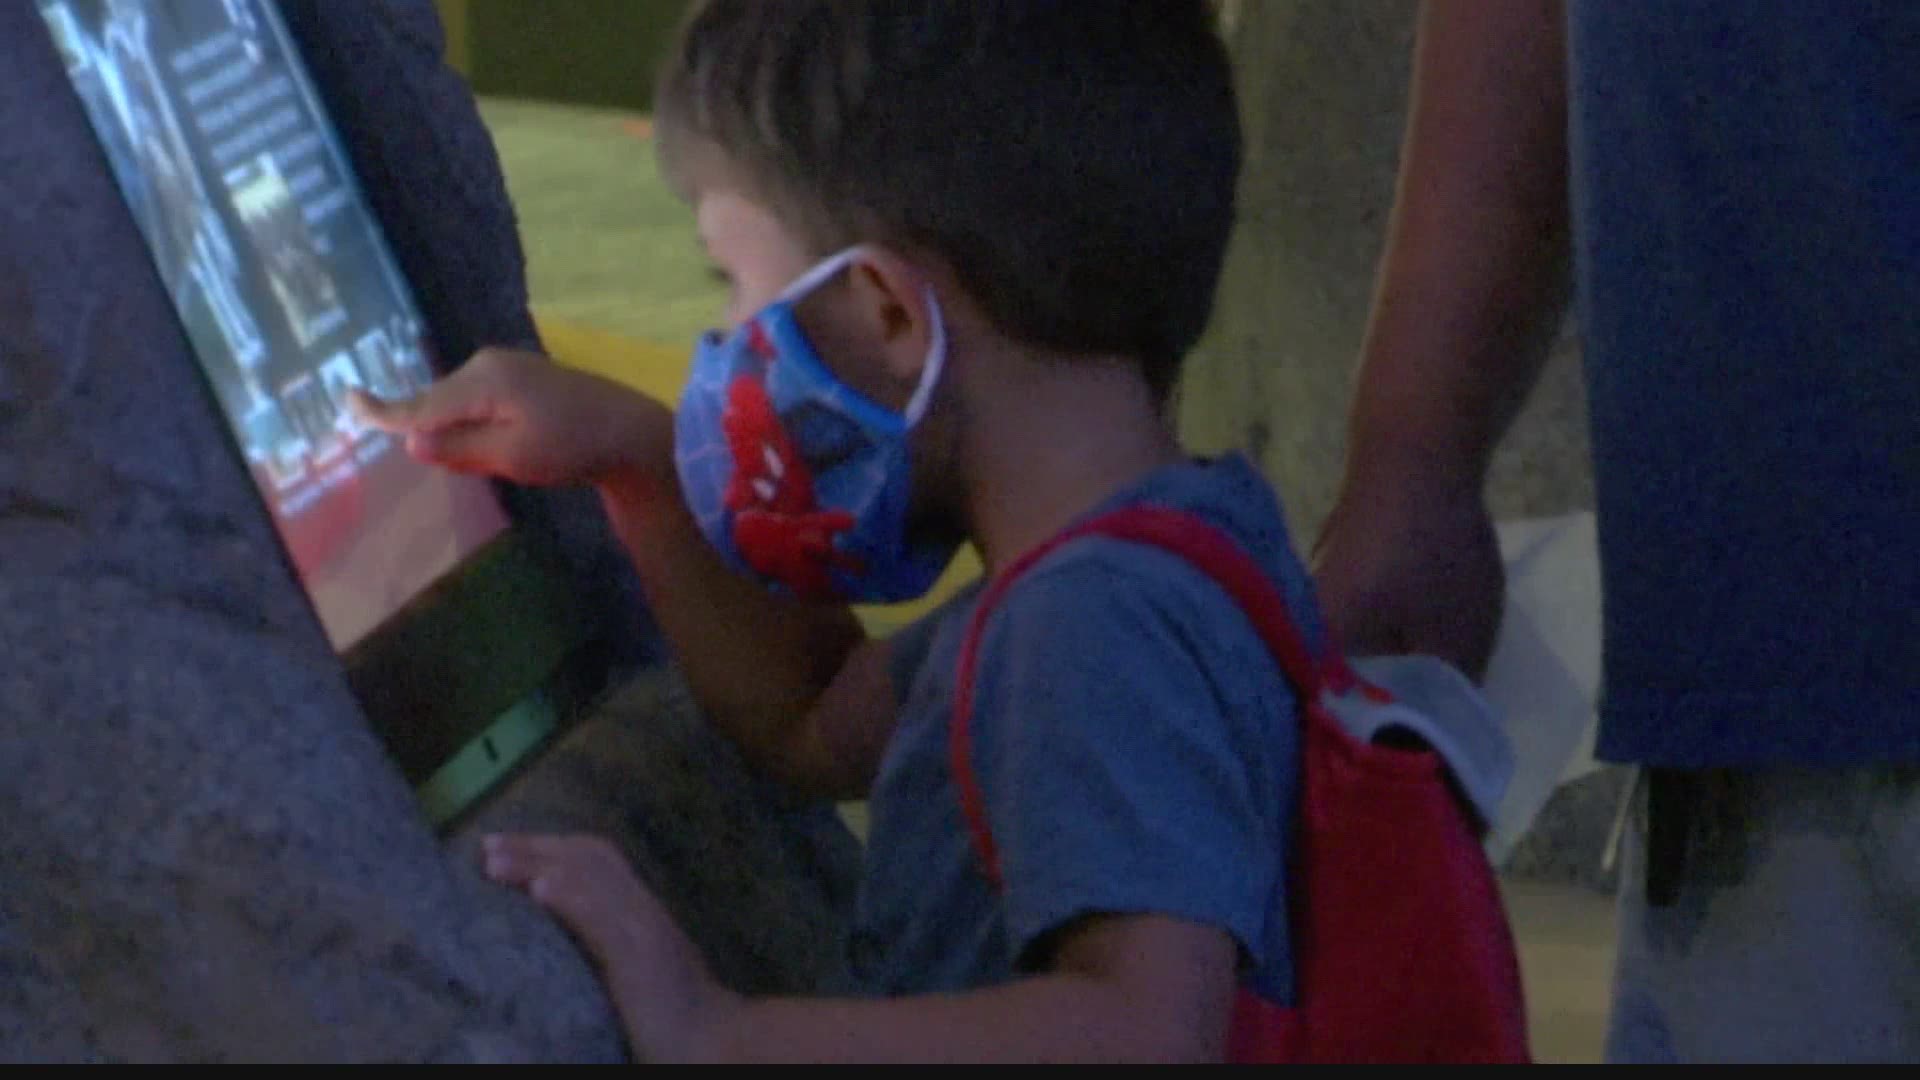 The Children's Museum of Indianapolis reopened to the public Saturday.